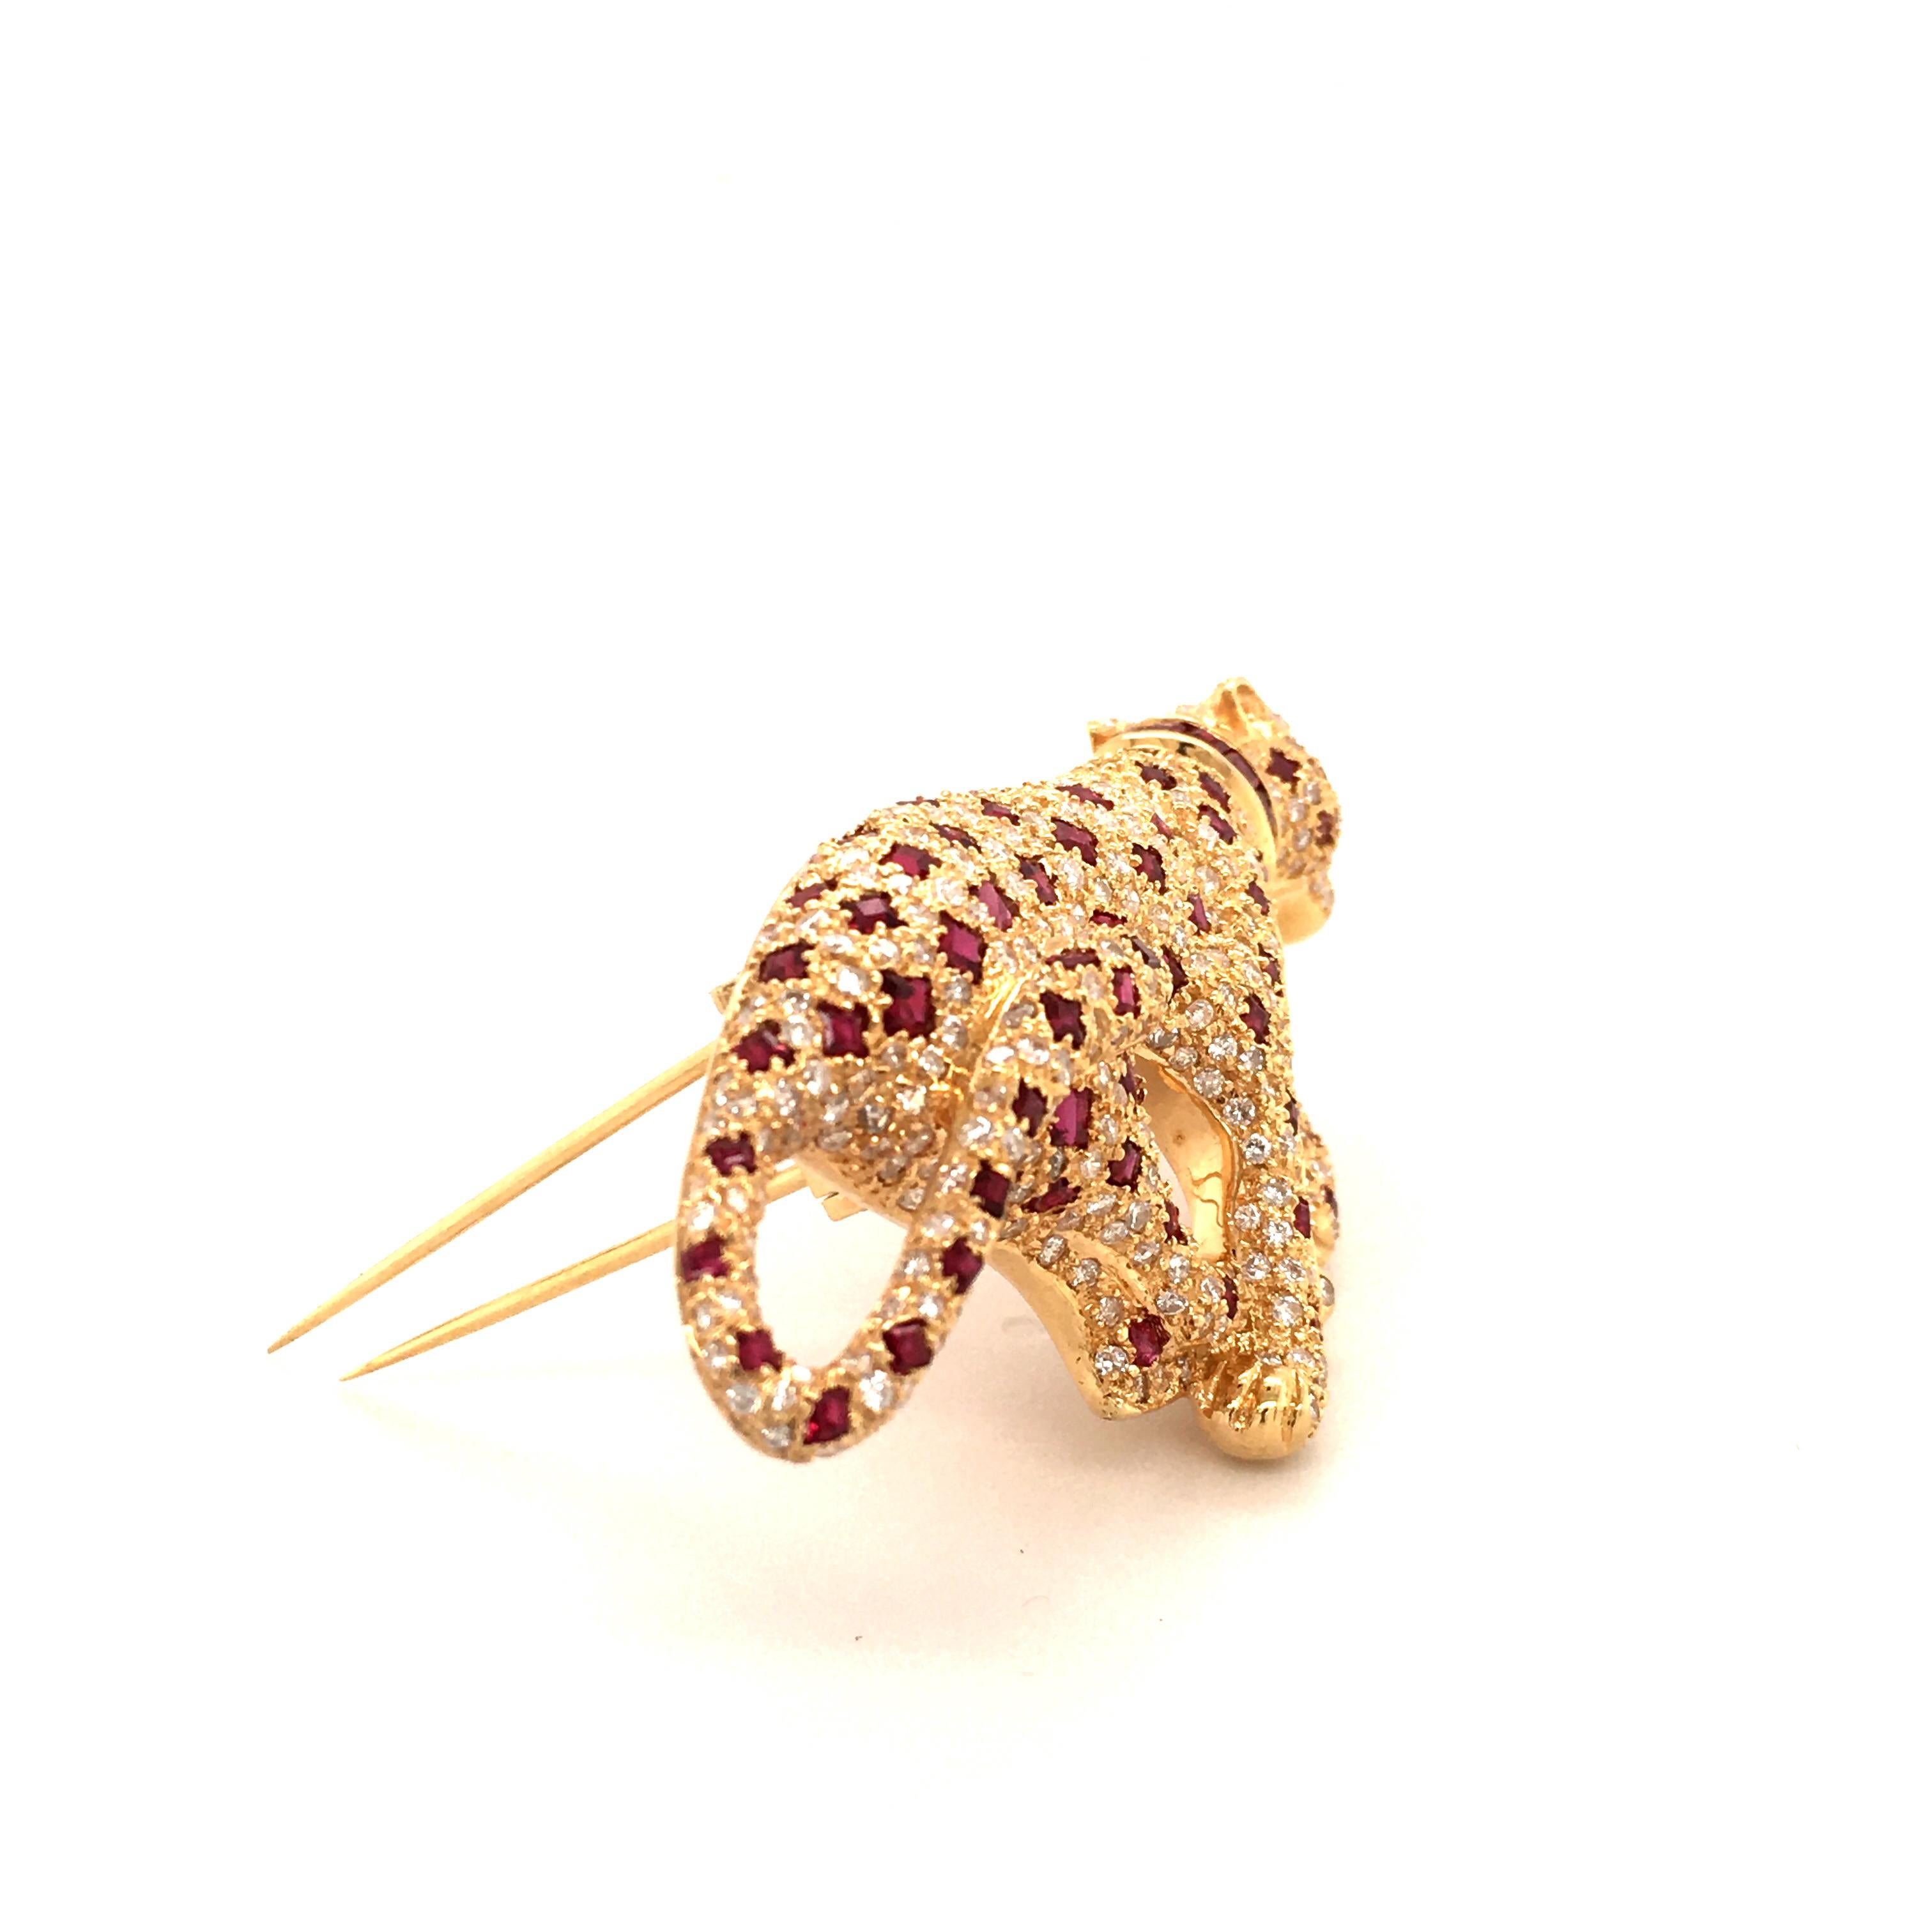 Unique Panther Brooch with Rubies and Diamonds in 18 Karat Yellow Gold 2